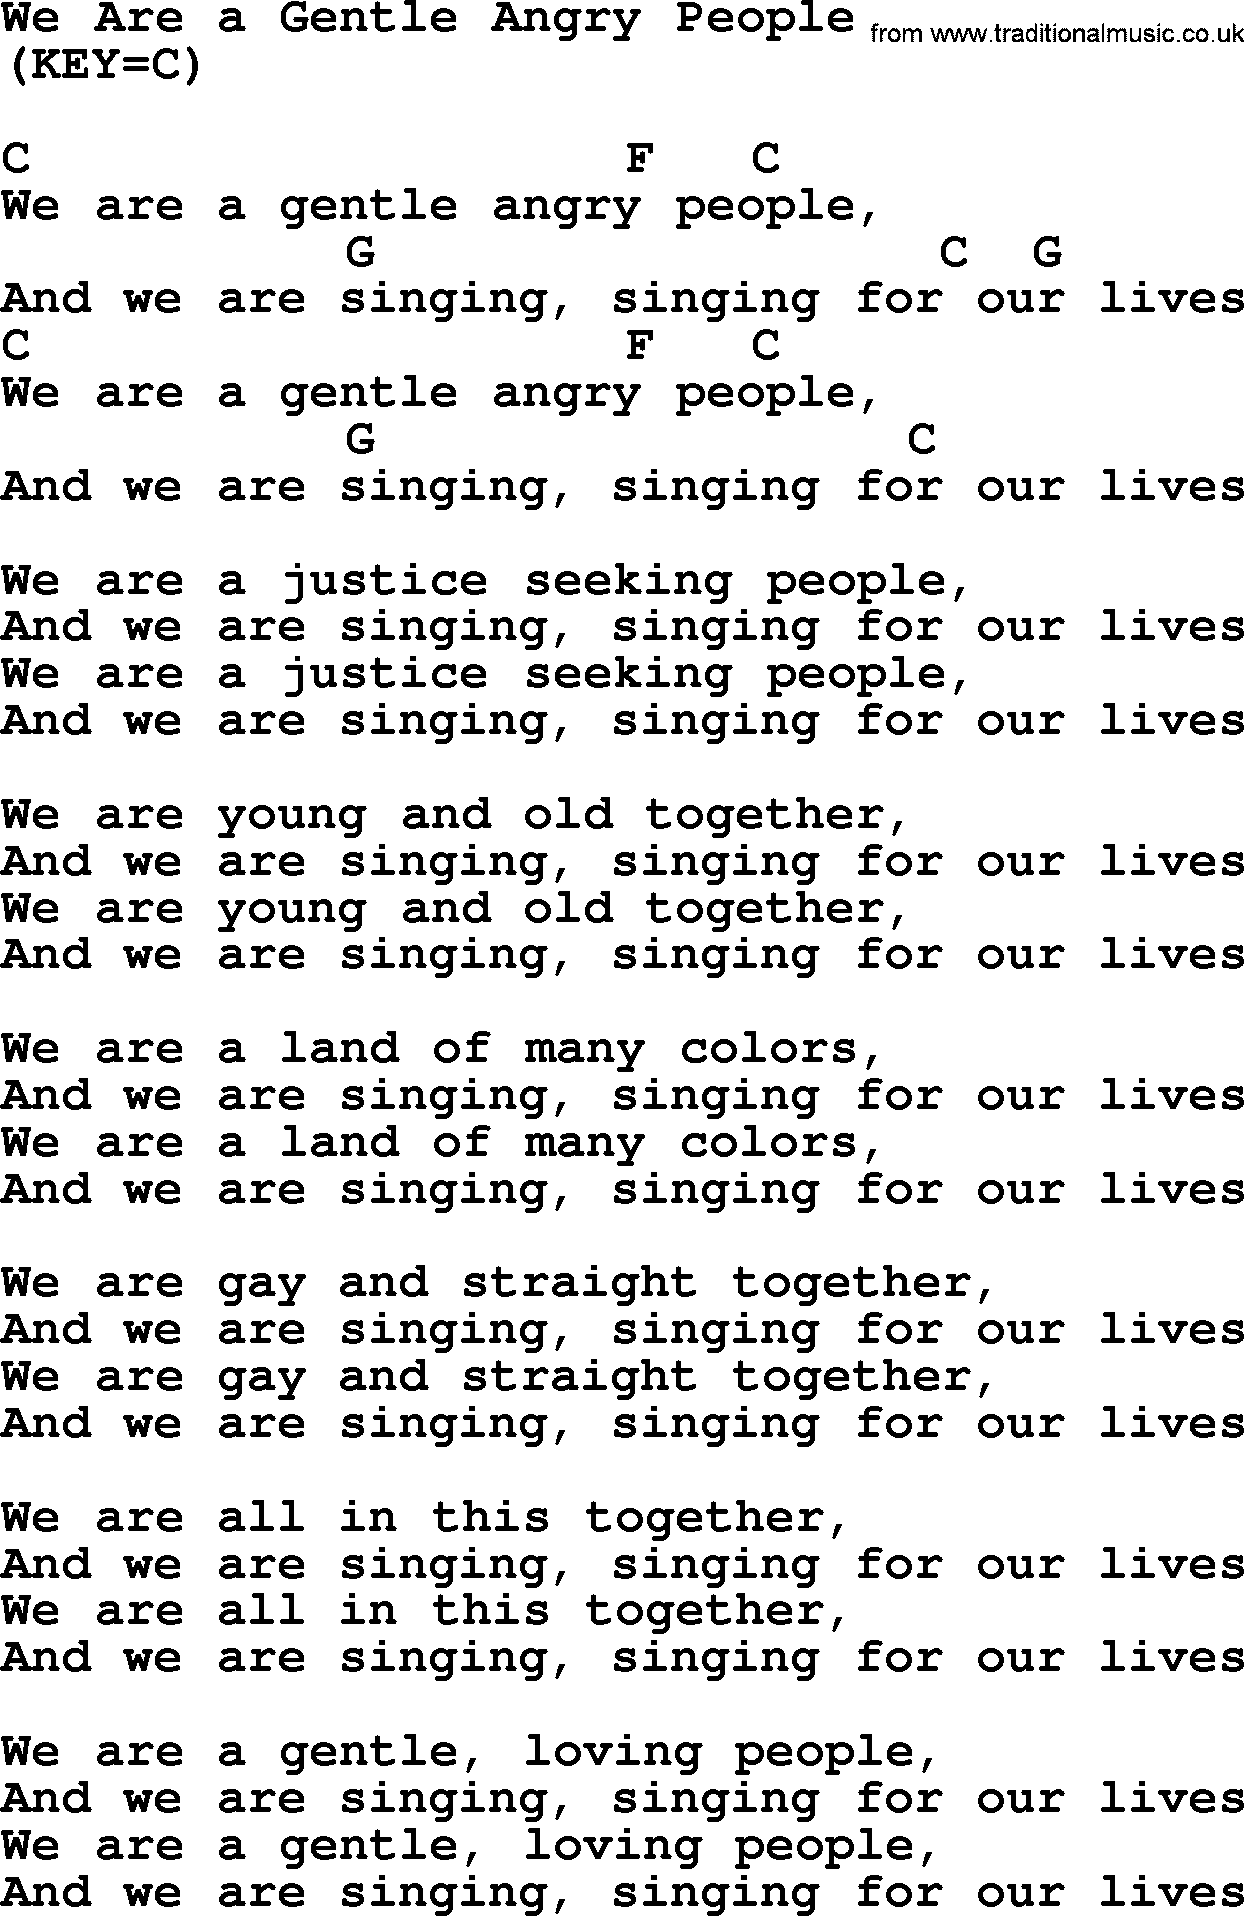 Political, Solidarity, Workers or Union song: We Are A Gentle Angry People, lyrics and chords